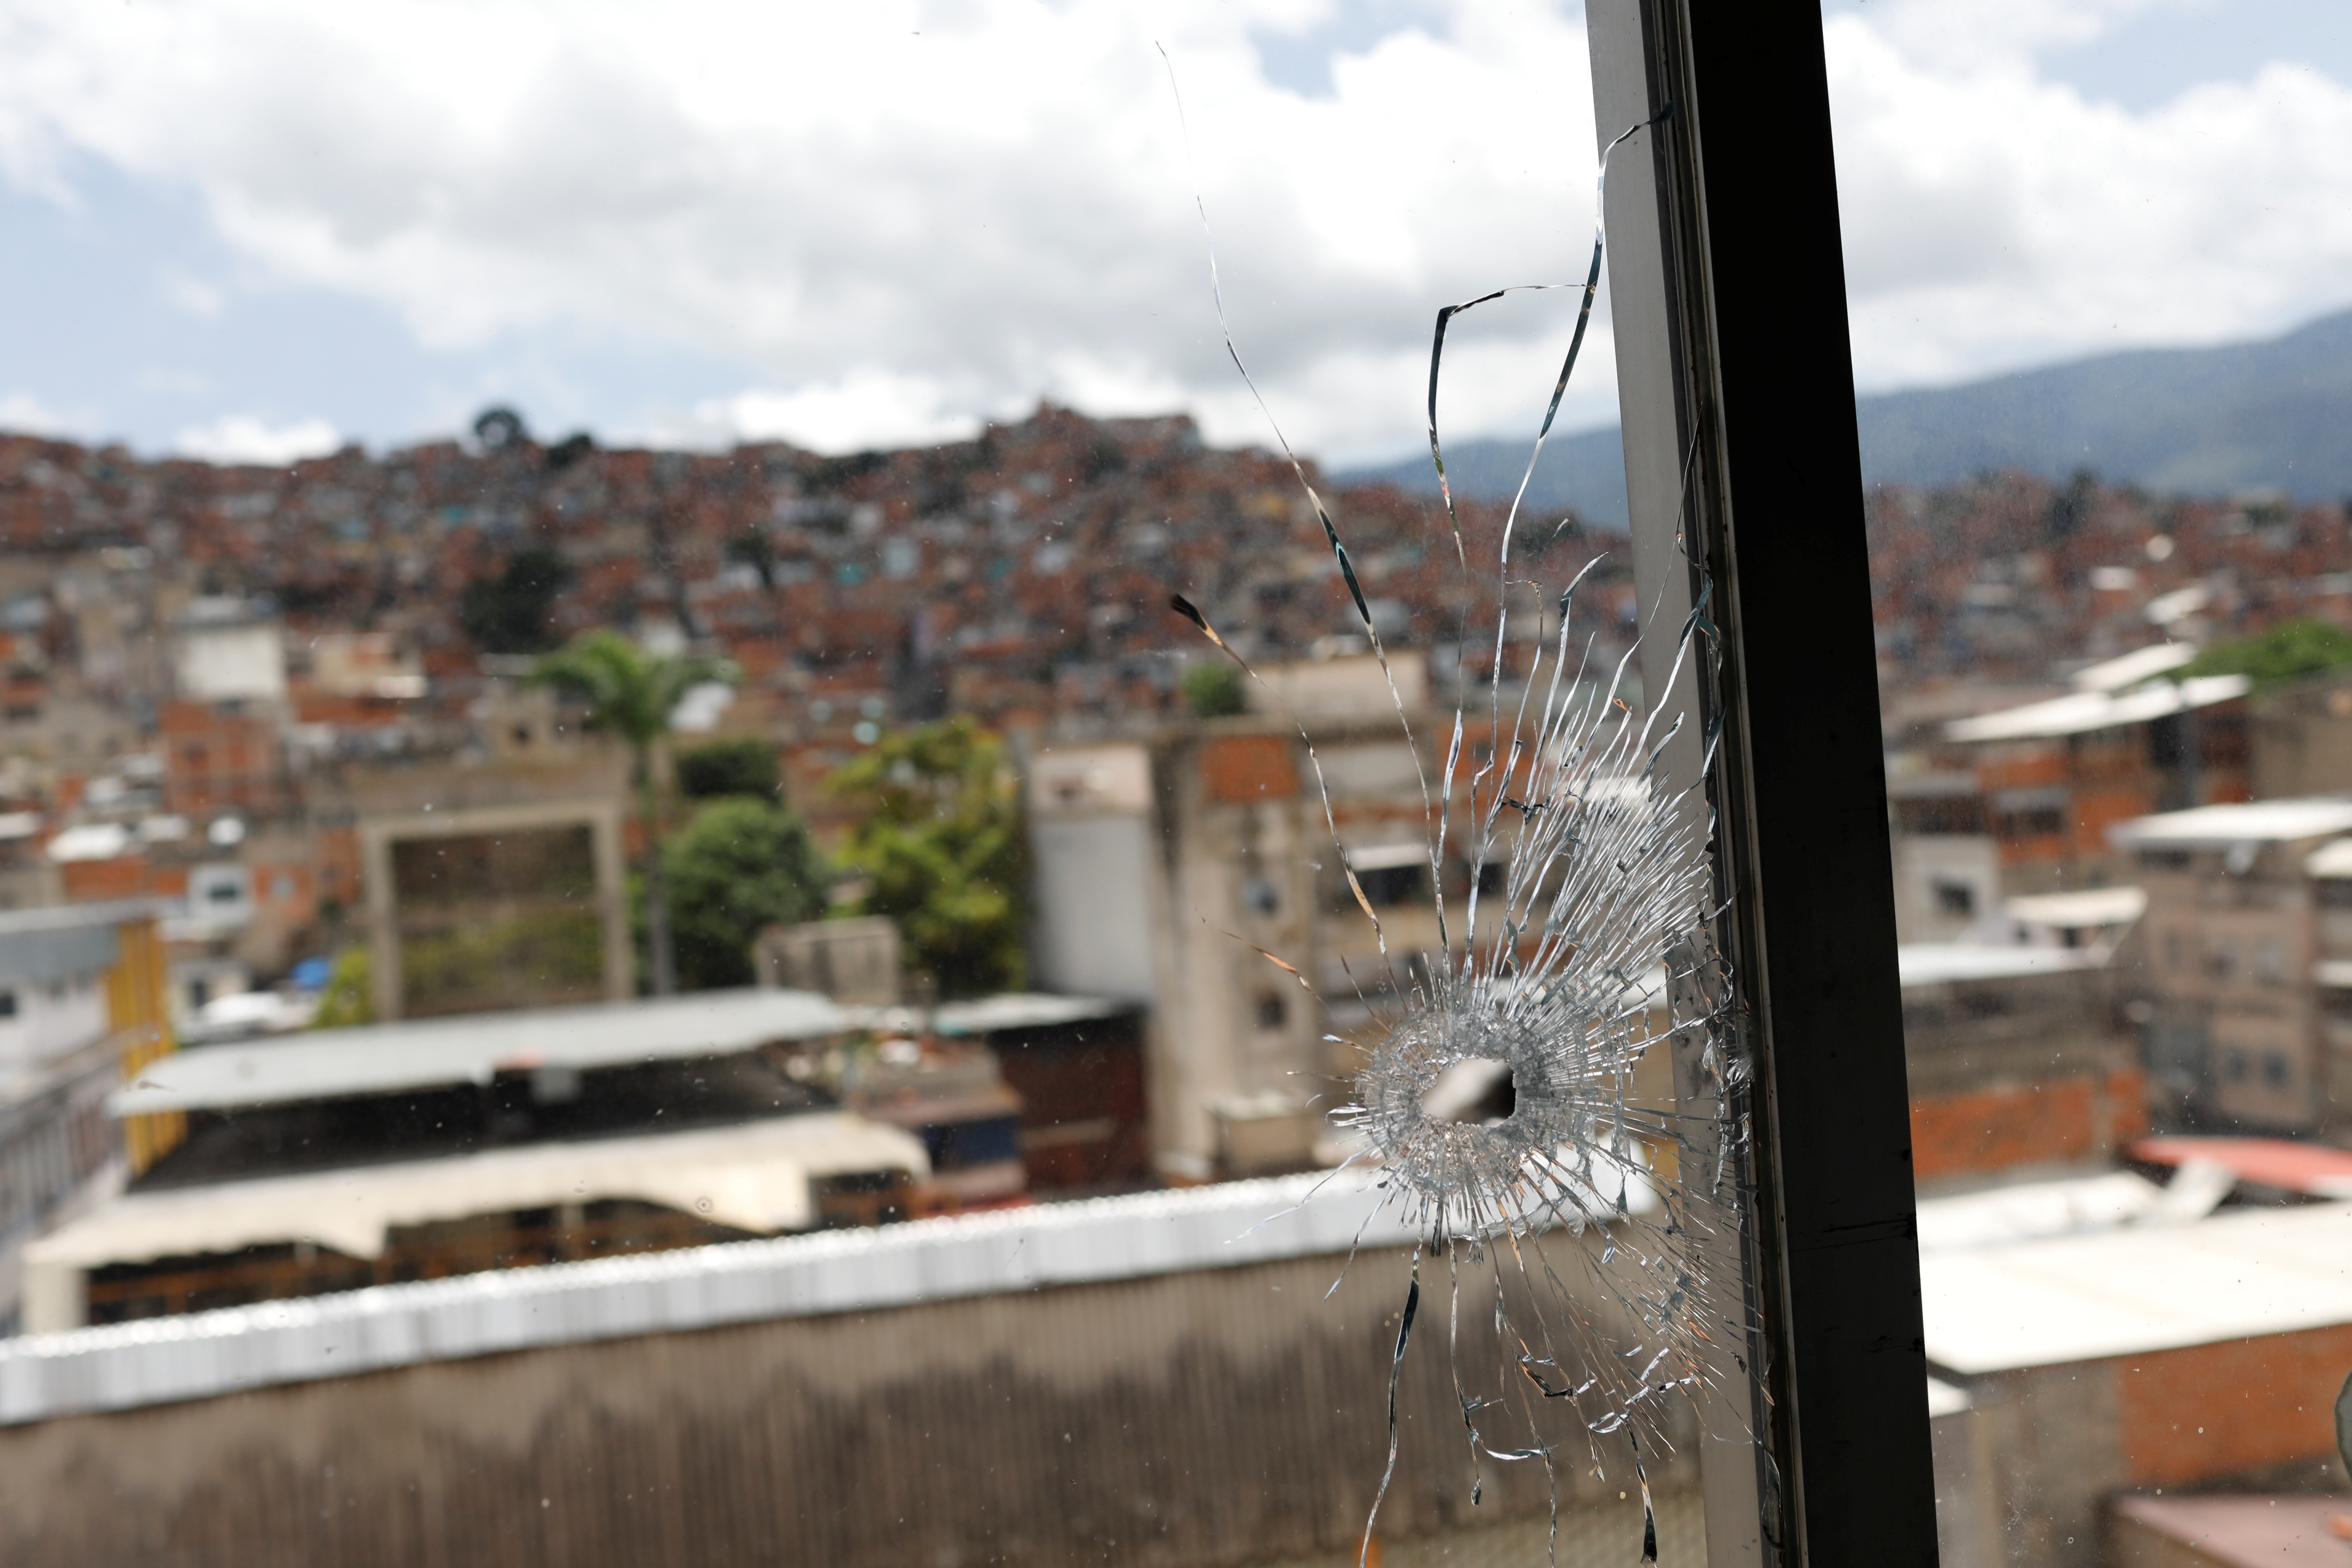 A window hit by a bullet is seen in the offices of the San Miguel Archangel church after armed confrontations between members of El Koki’s criminal gang and police forces in the El Cementerio neighborhood, in Caracas